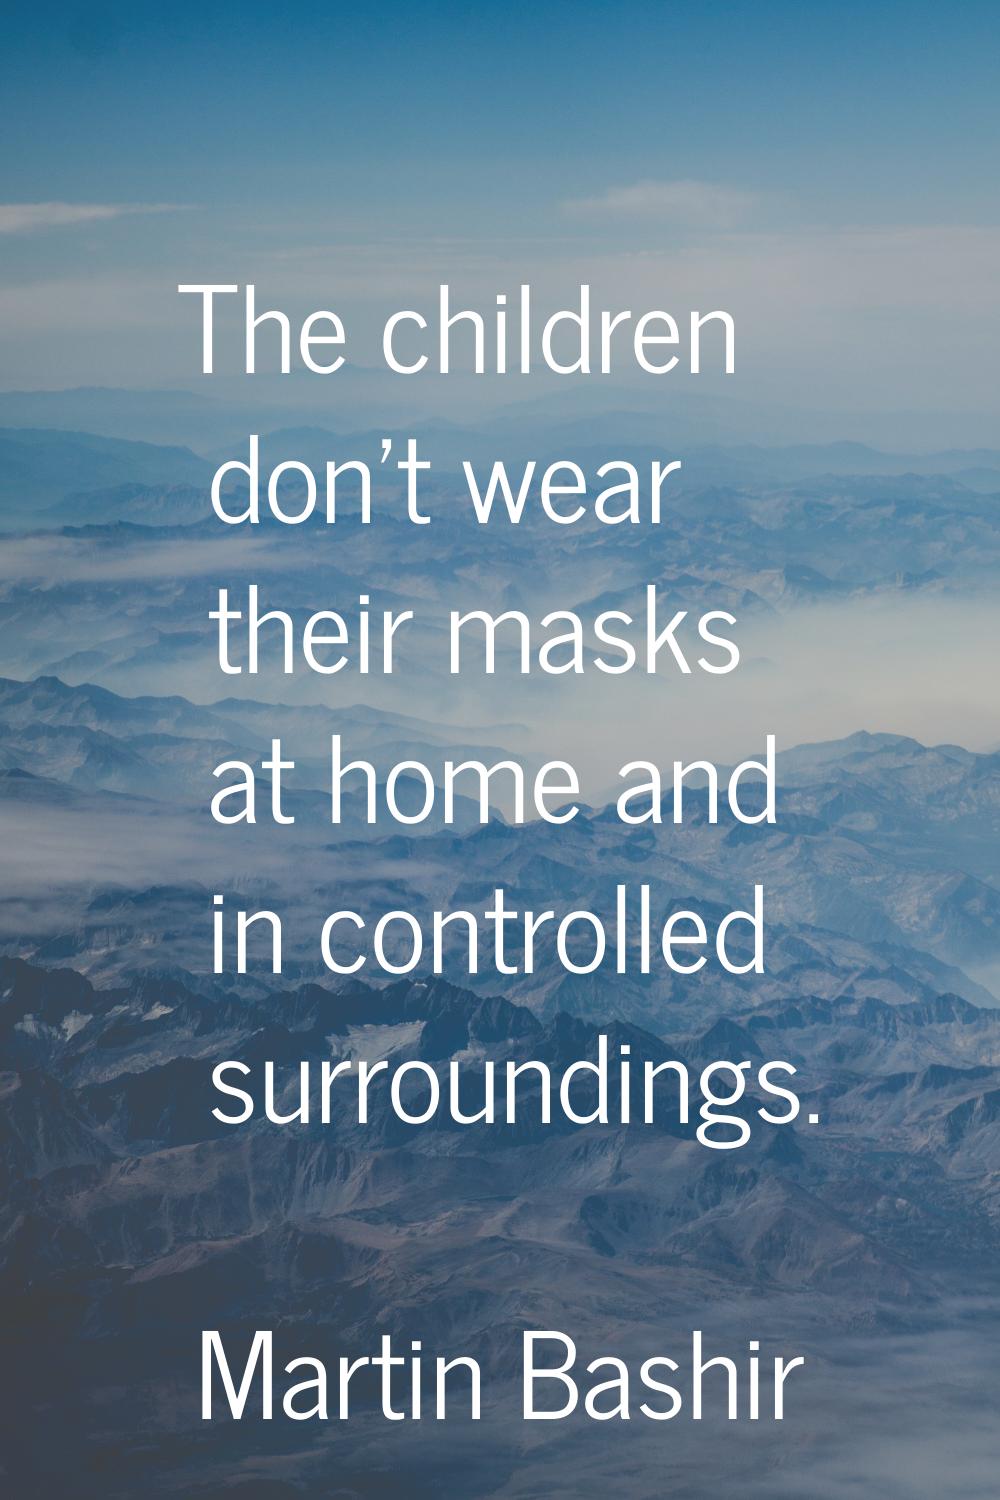 The children don't wear their masks at home and in controlled surroundings.